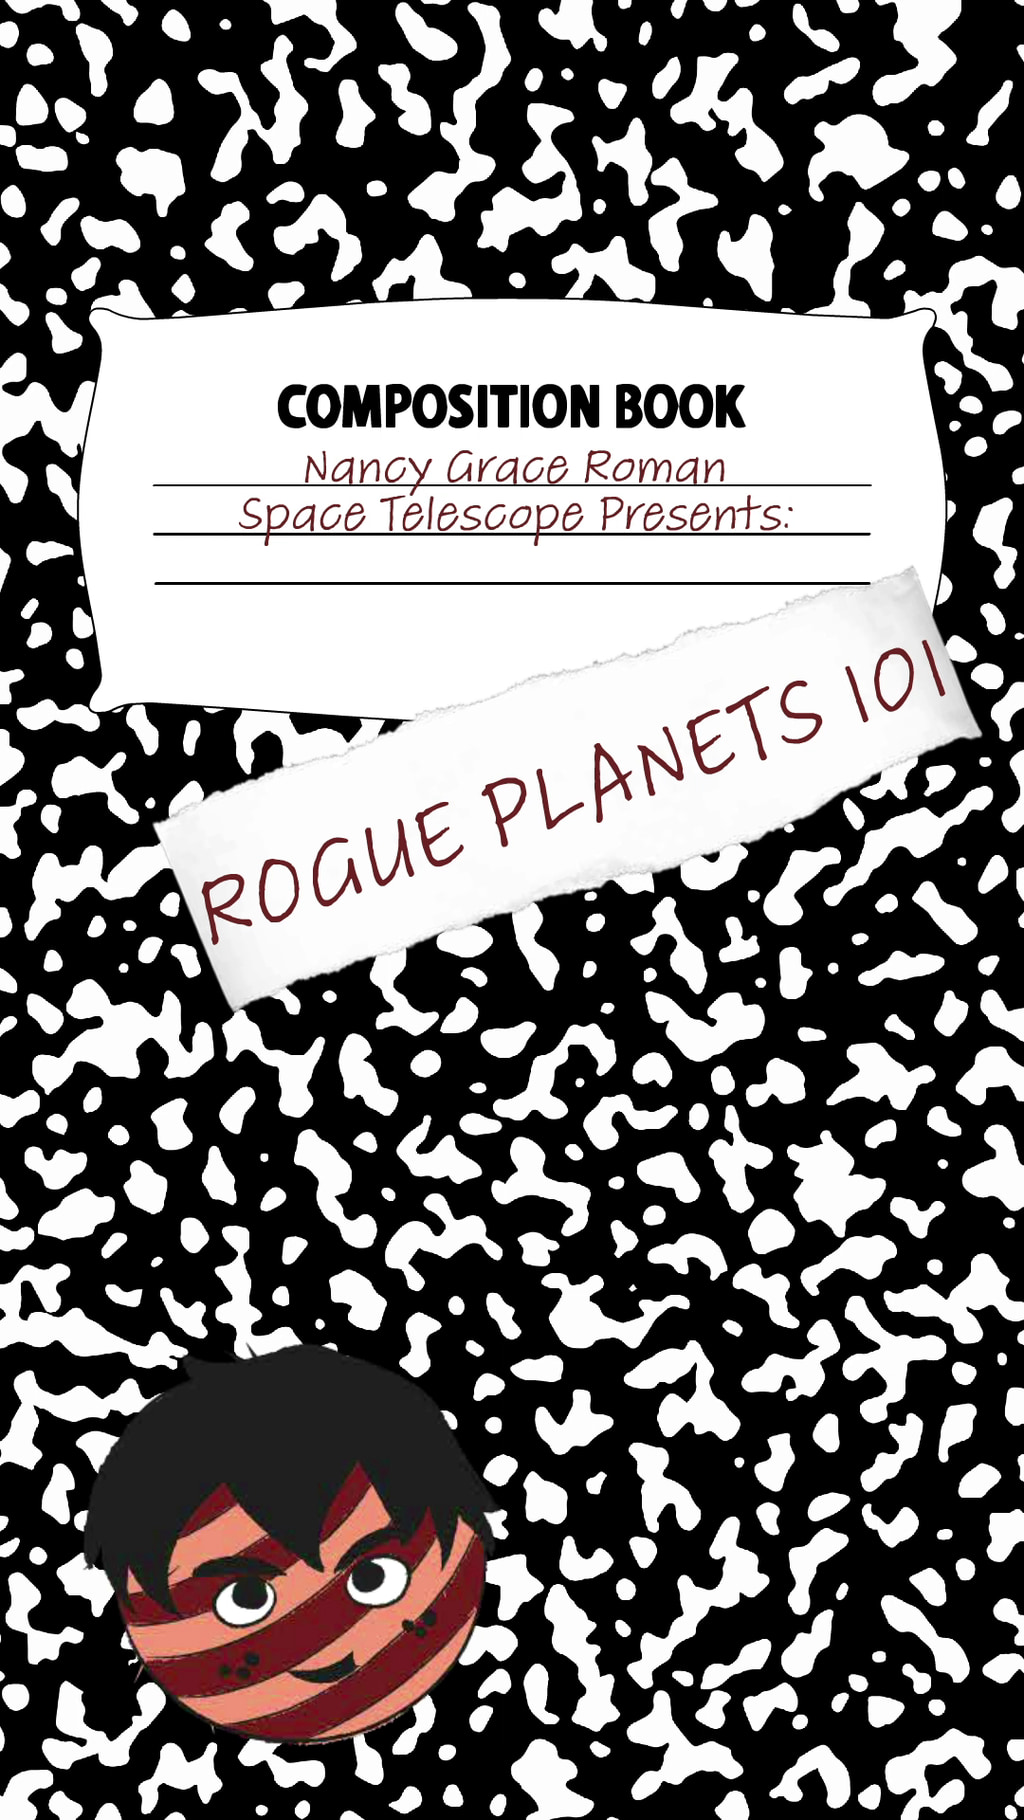 Rogue Planets 101: Cover pageComplete transcript available.